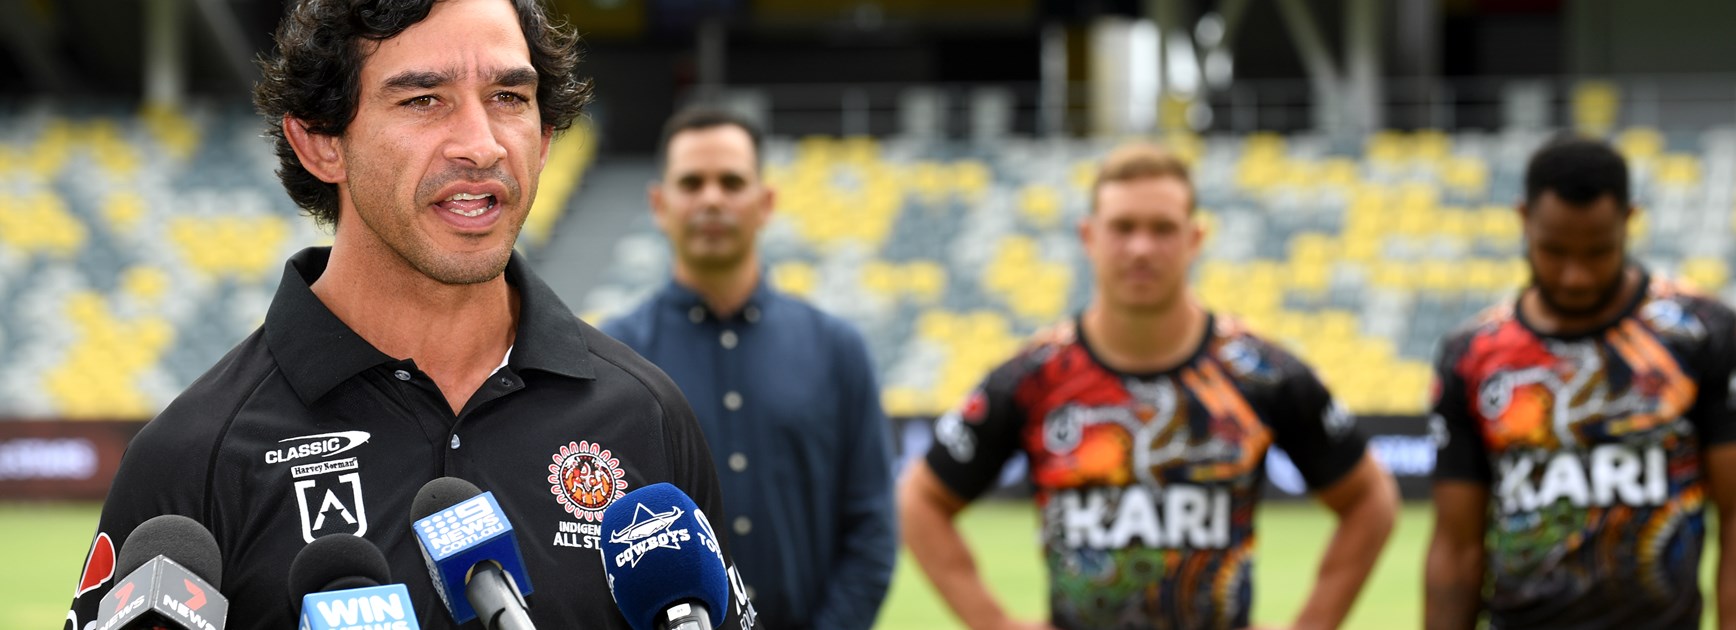 Our voice is being heard: Thurston backs All Stars anthem stance